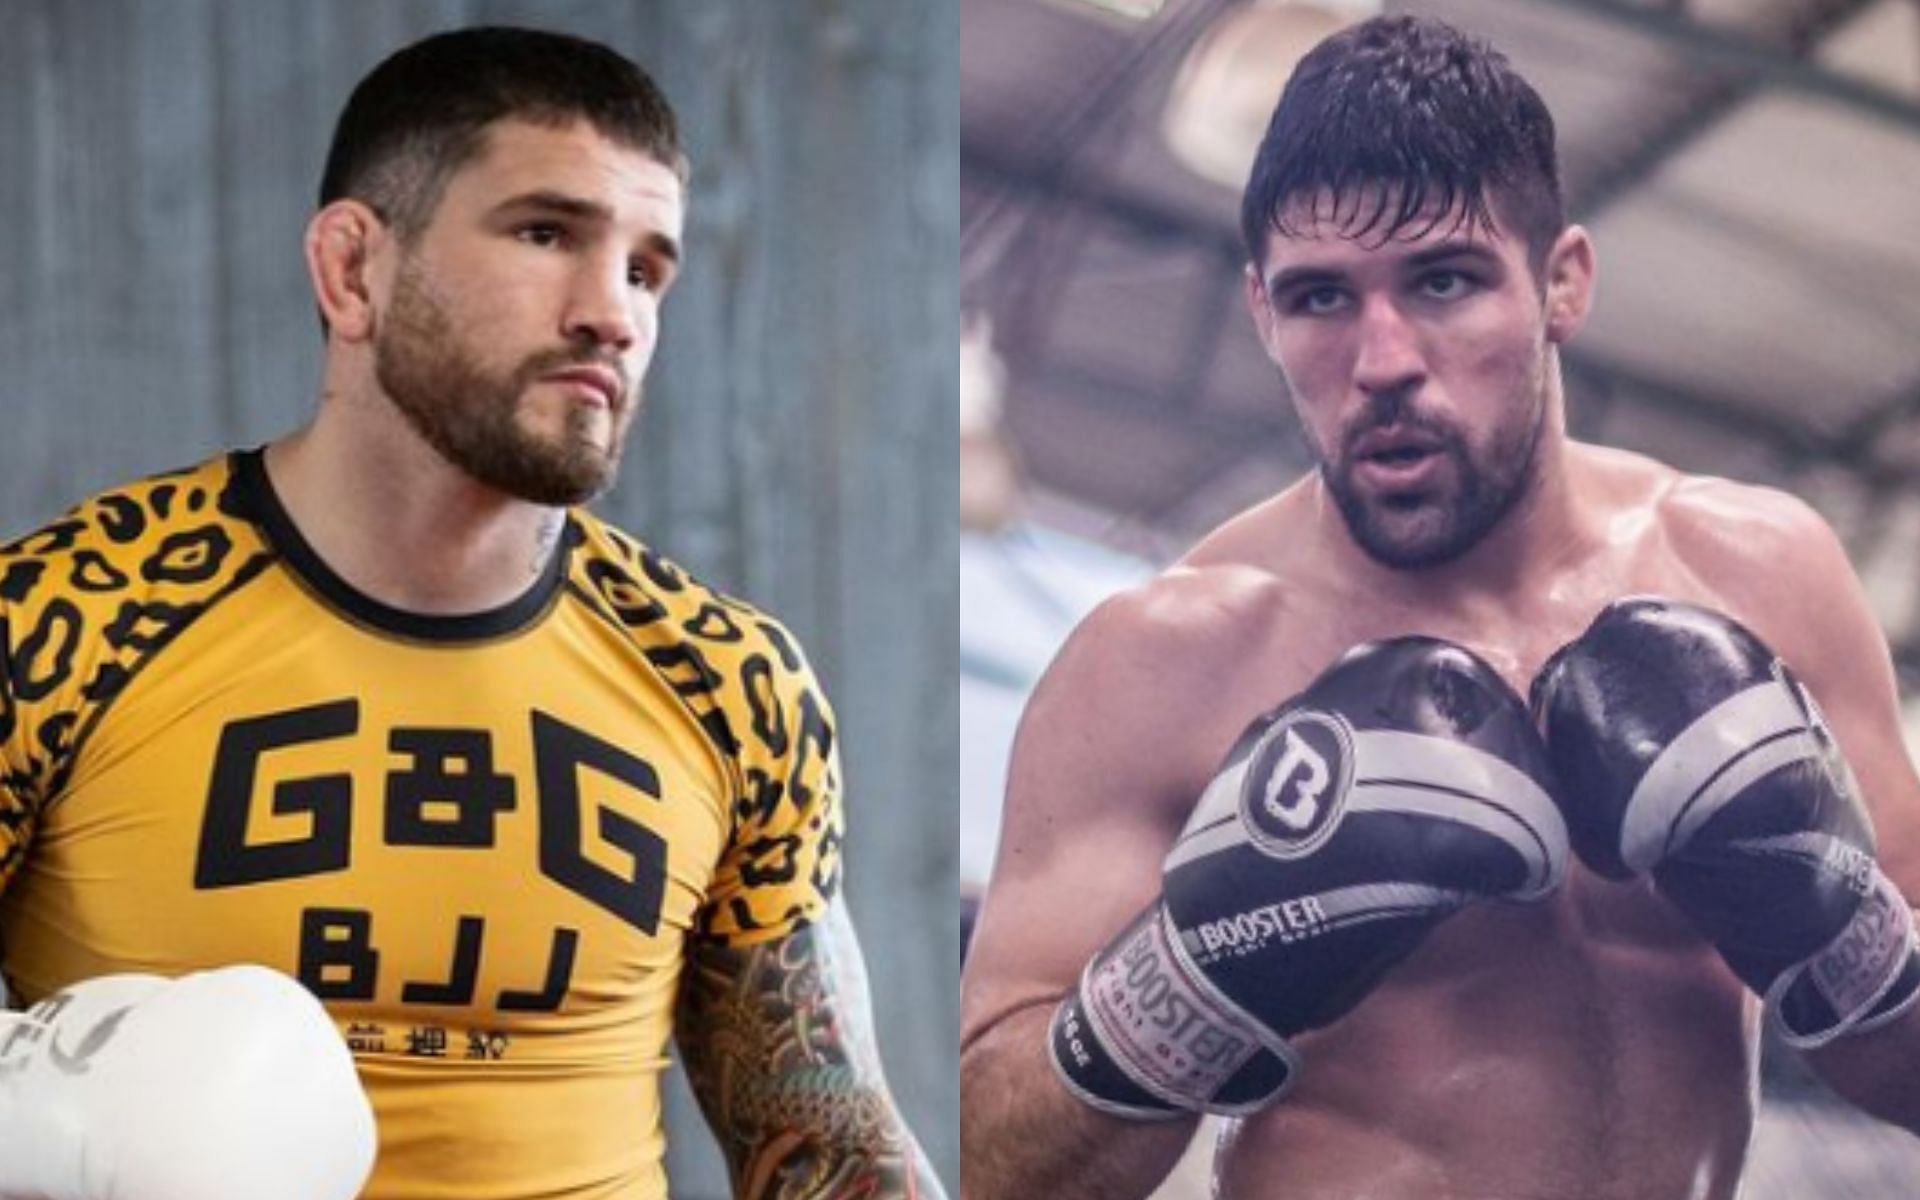 Sean Brady [Left] vs. Vicente Luque [Right] has reportedly been scrapped from UFC Atlantic City [Image courtesy: @seanbradymma and @luquevicente - Instagram]